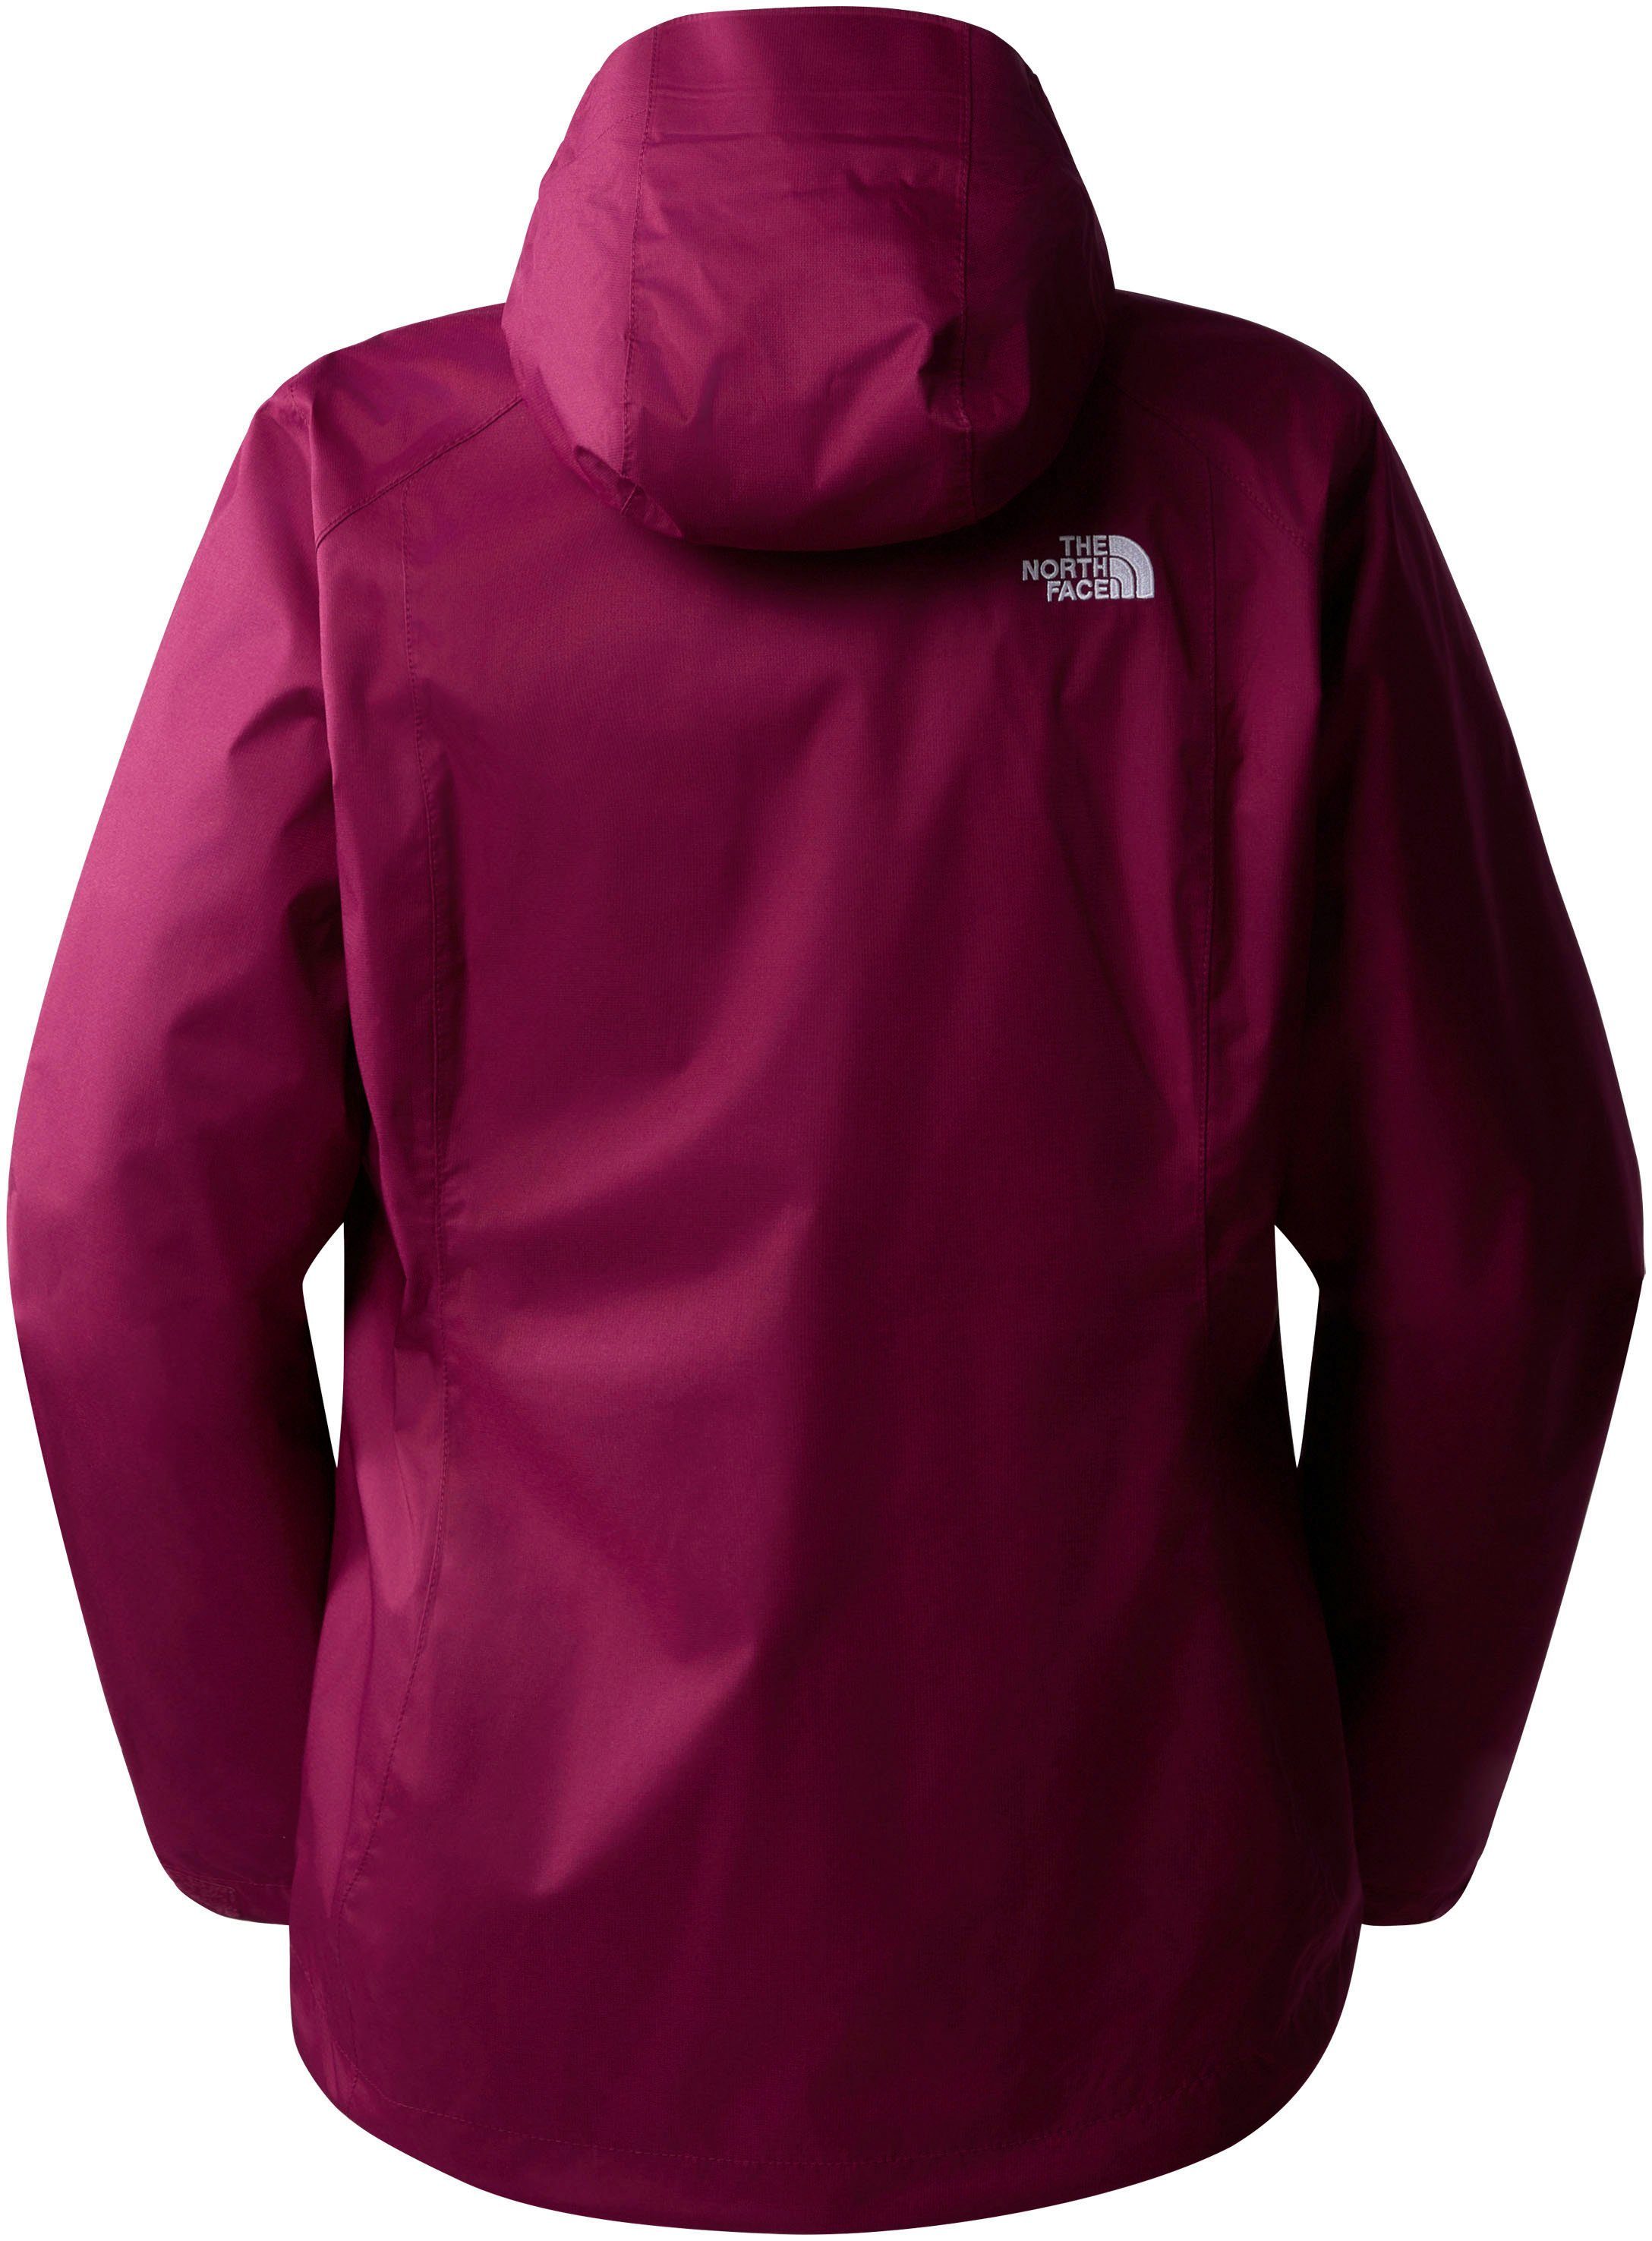 The North Face Funktionsparka W TRICLIMATE Stehkragen JACKET red EVOLVE mit II